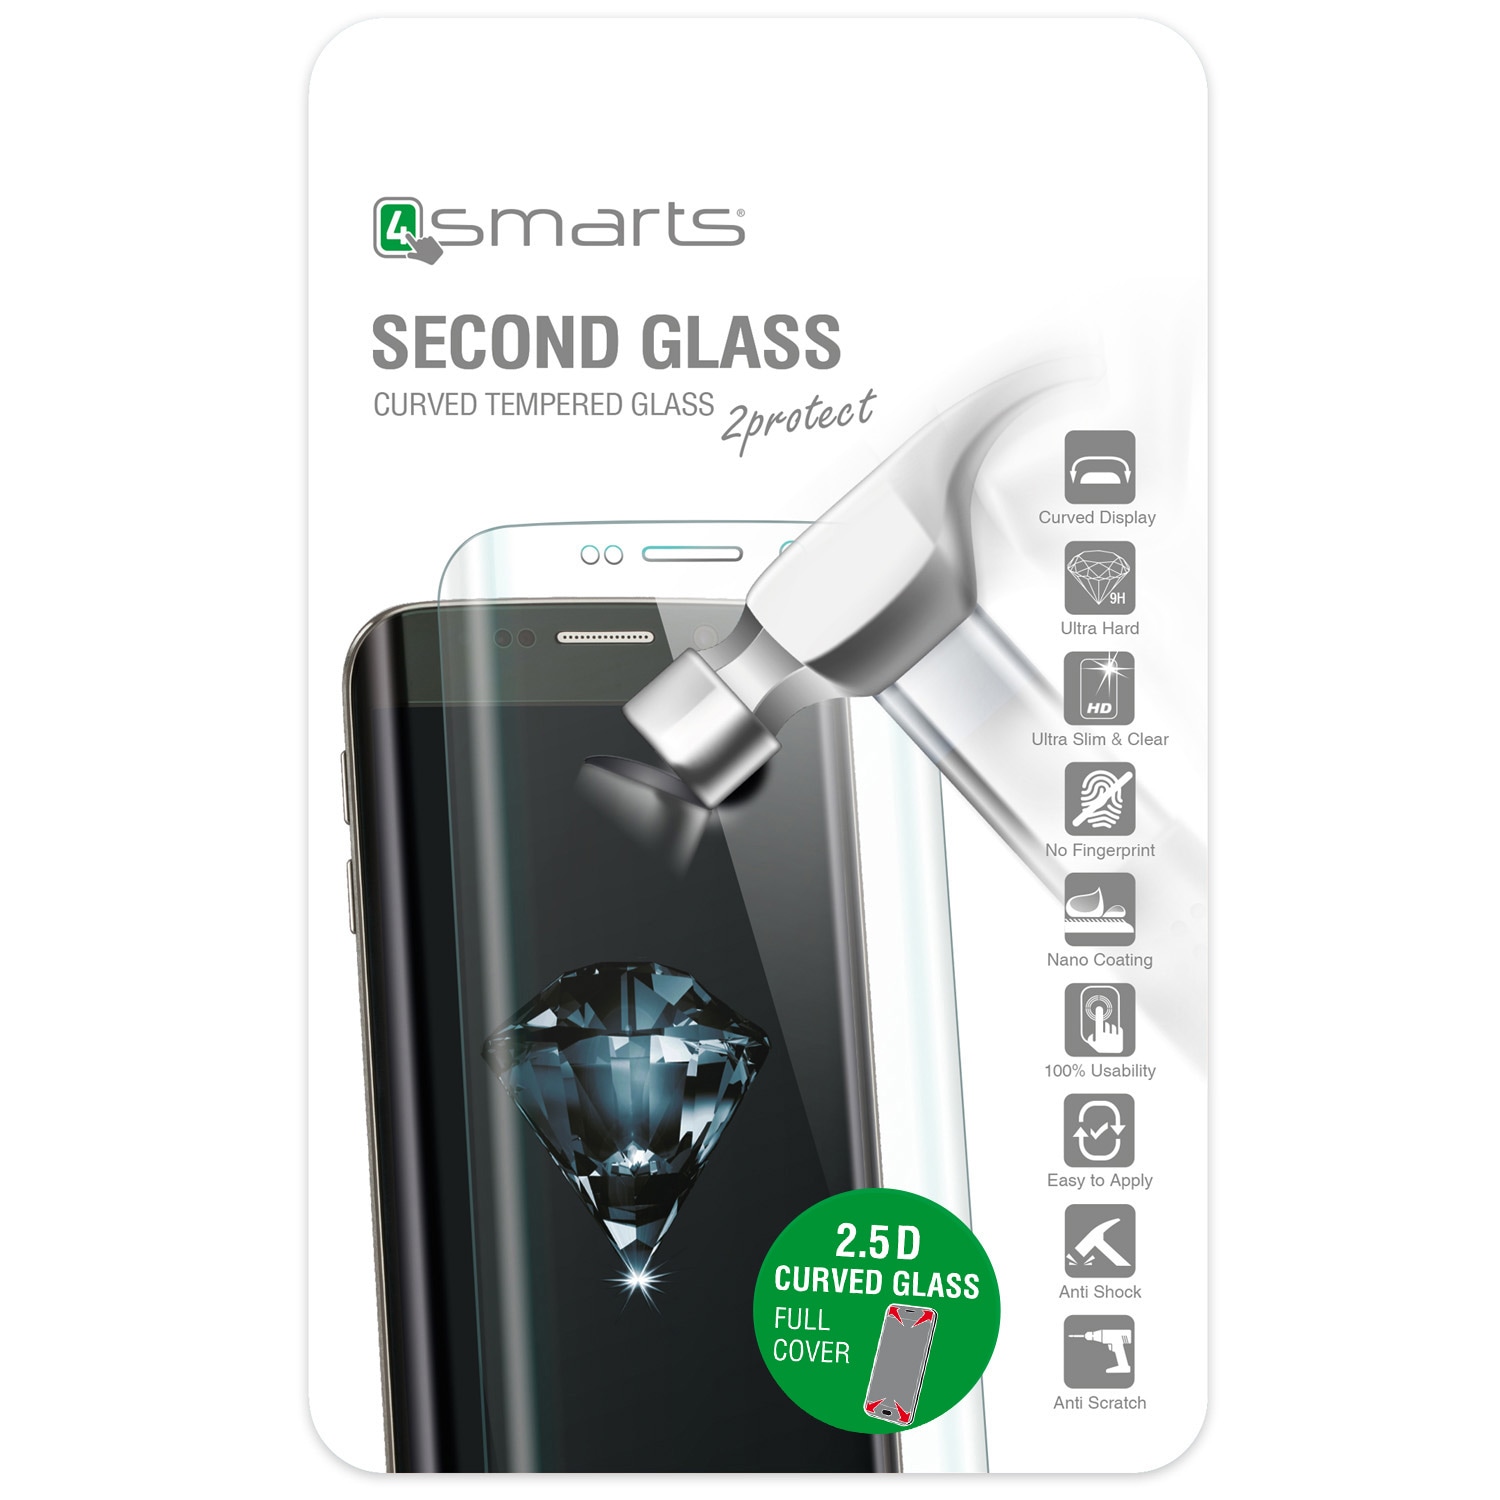 4smarts Second Glass Curved 2.5D till iPhone 6 / 6S - Silver